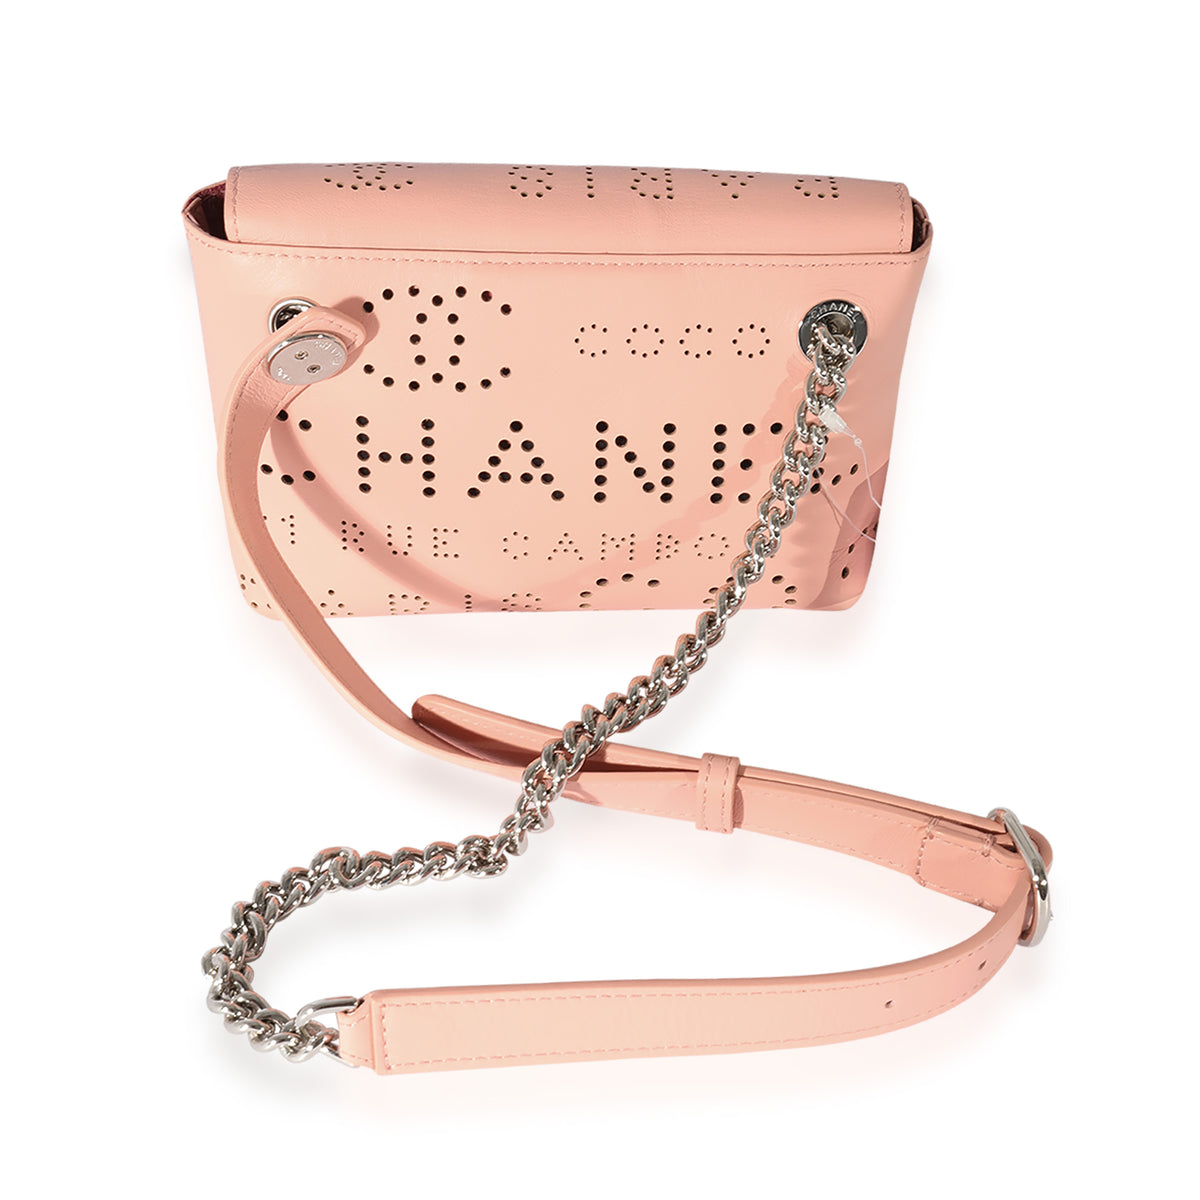 Chanel Pink Leather Eyelet Waist Bag Chanel